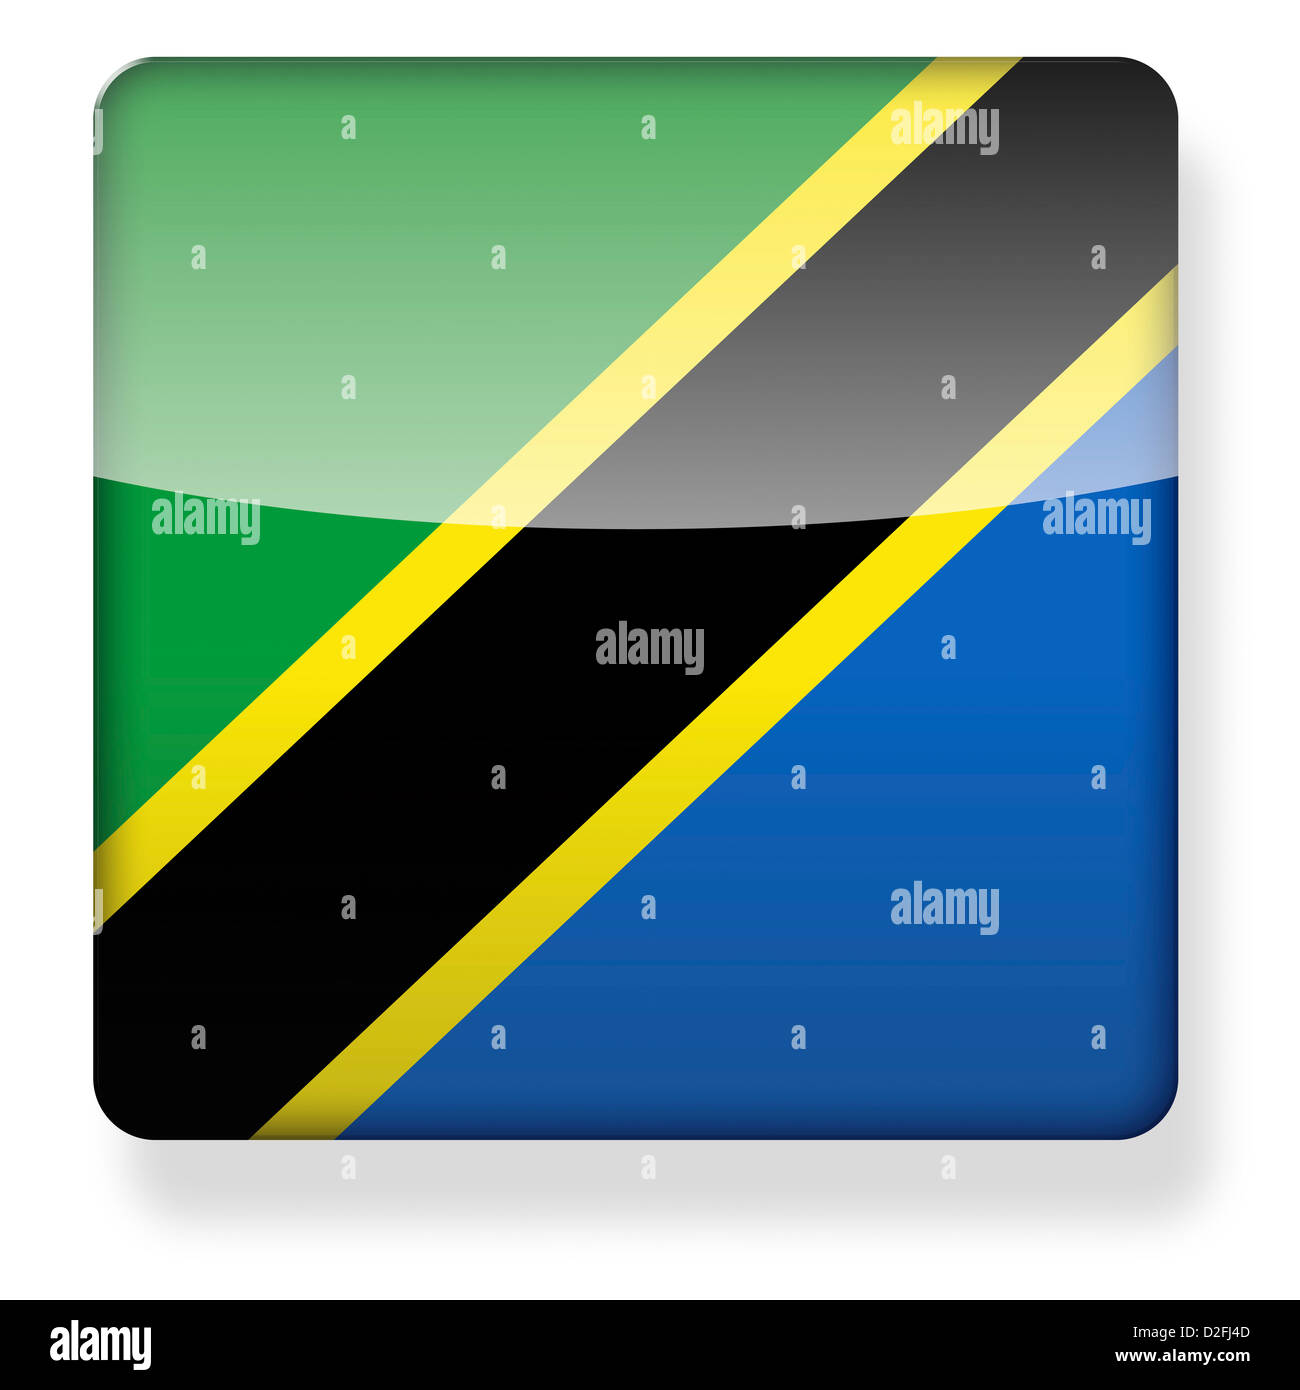 Tanzania flag as an app icon. Clipping path included. Stock Photo